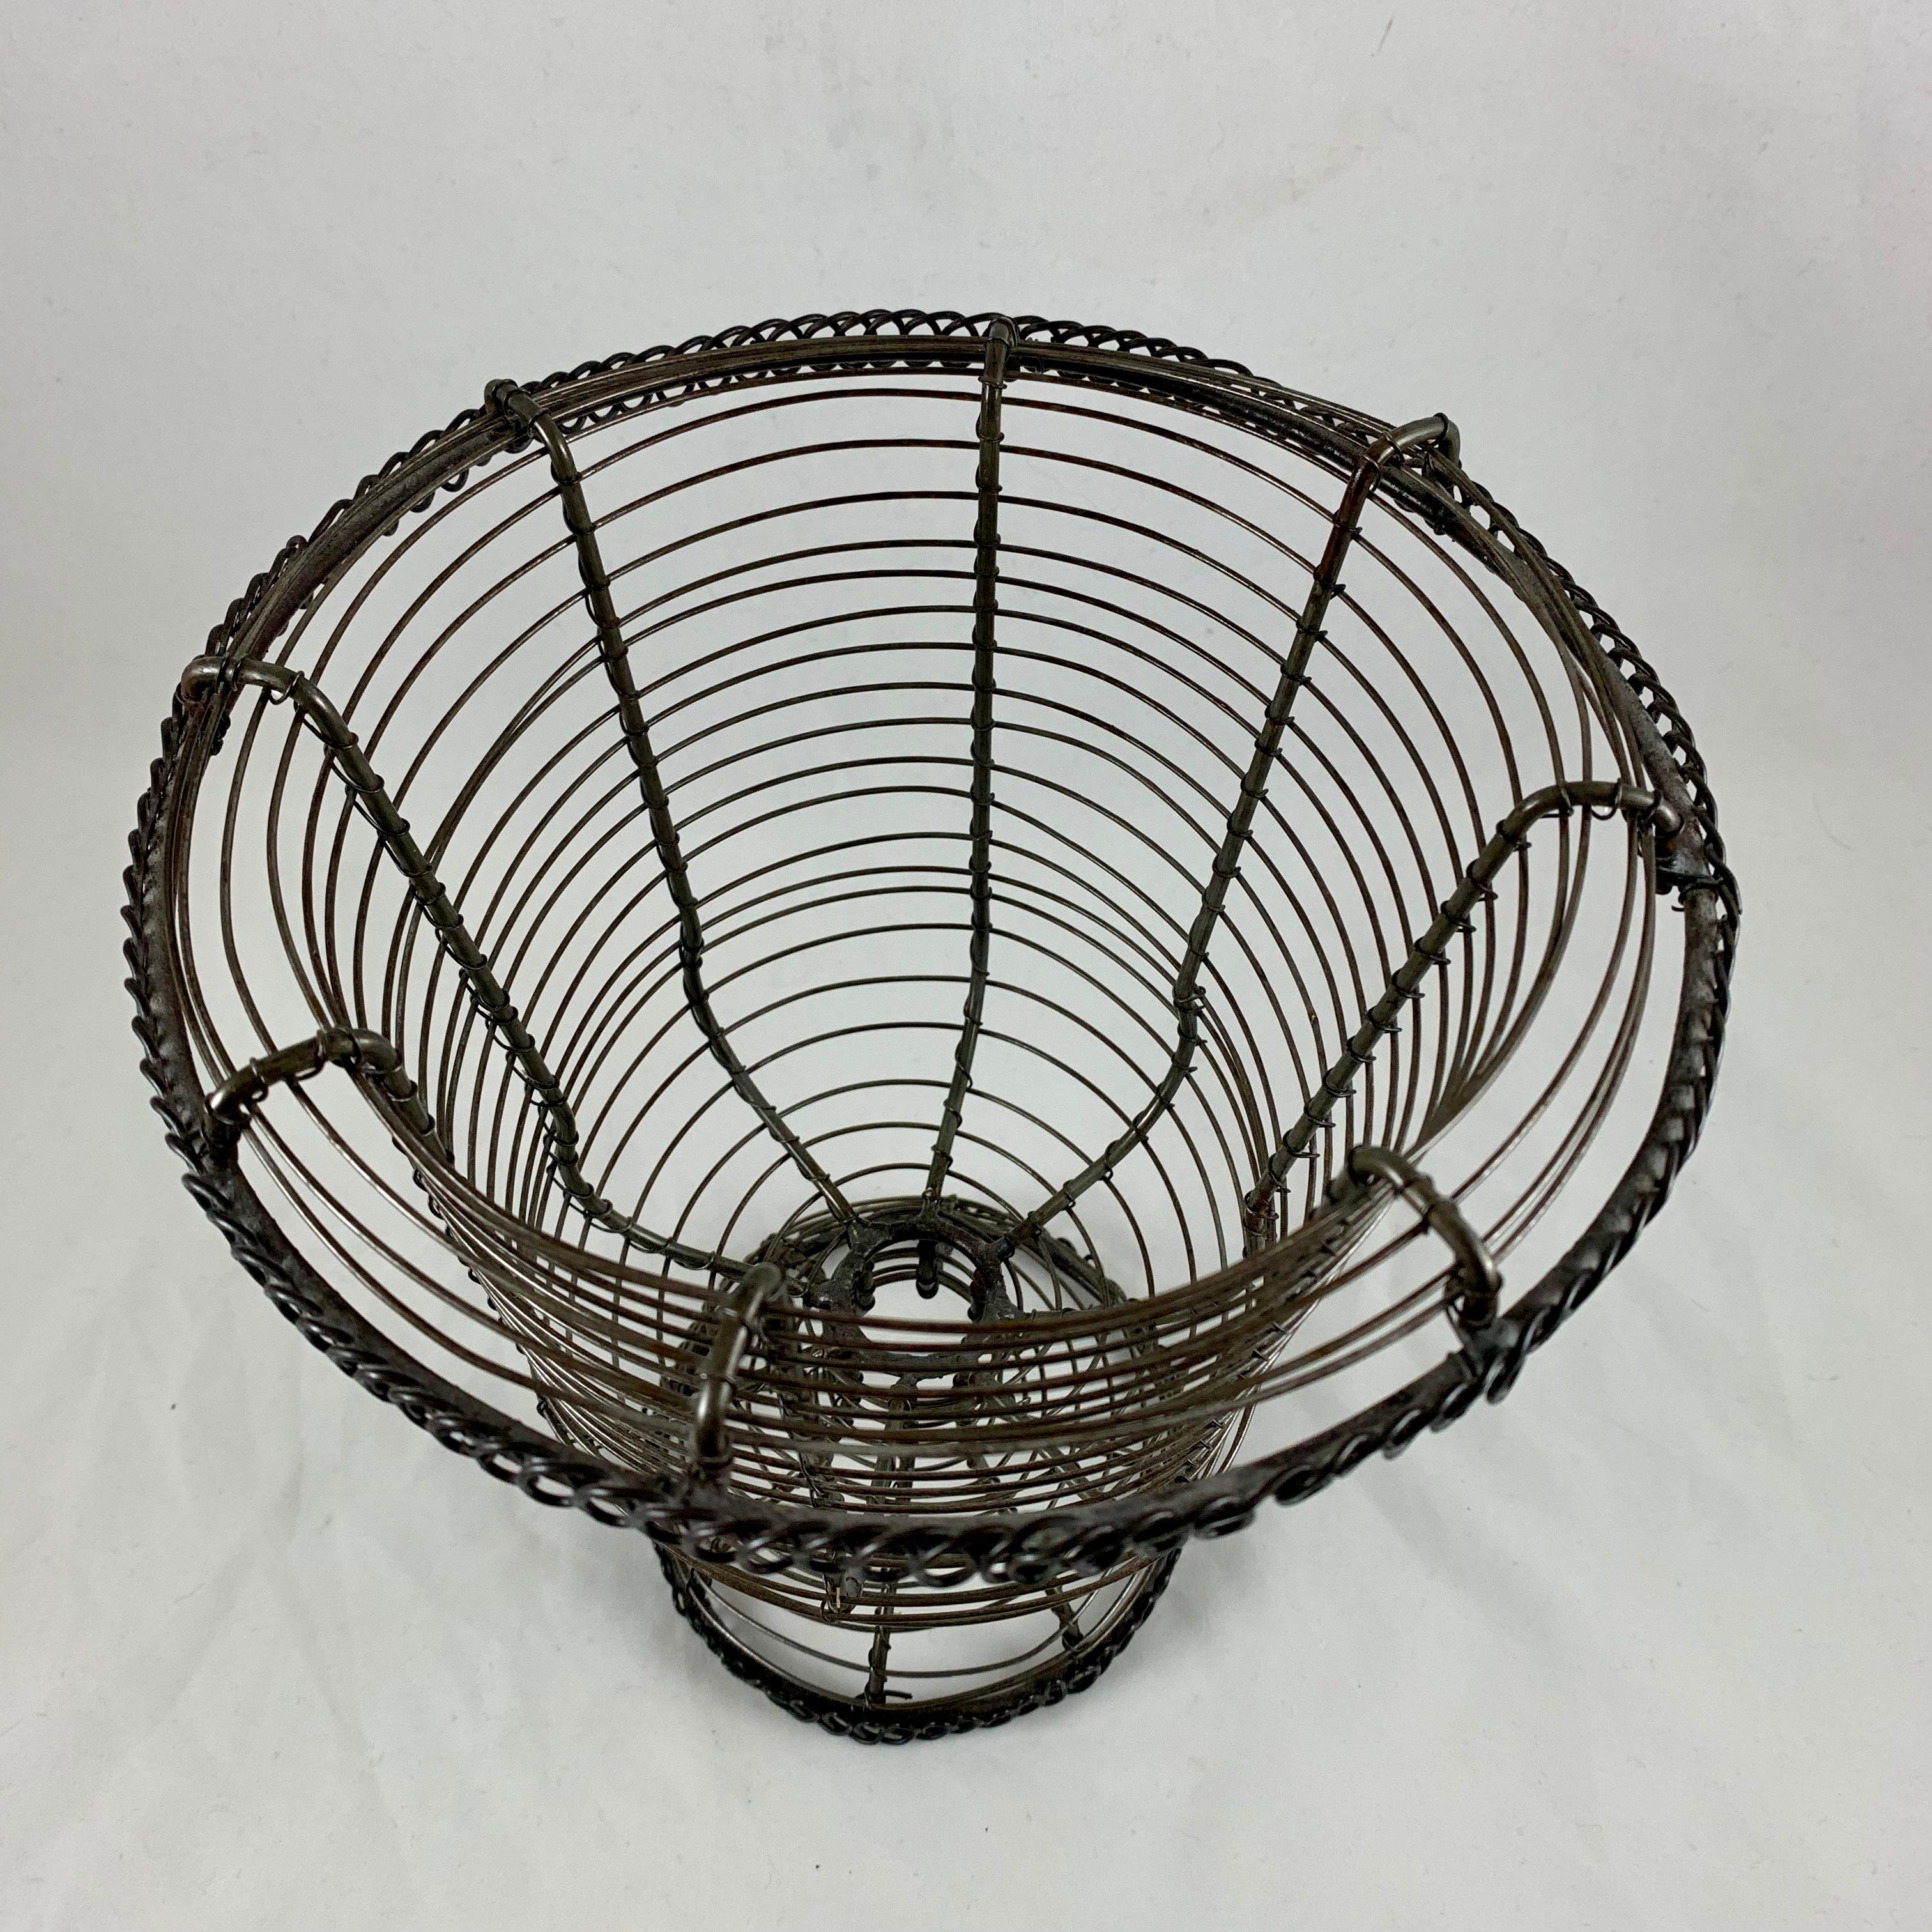 French Provincial Late 19th Century Antique French Pedestal Urn Handmade Twisted Wire Basket